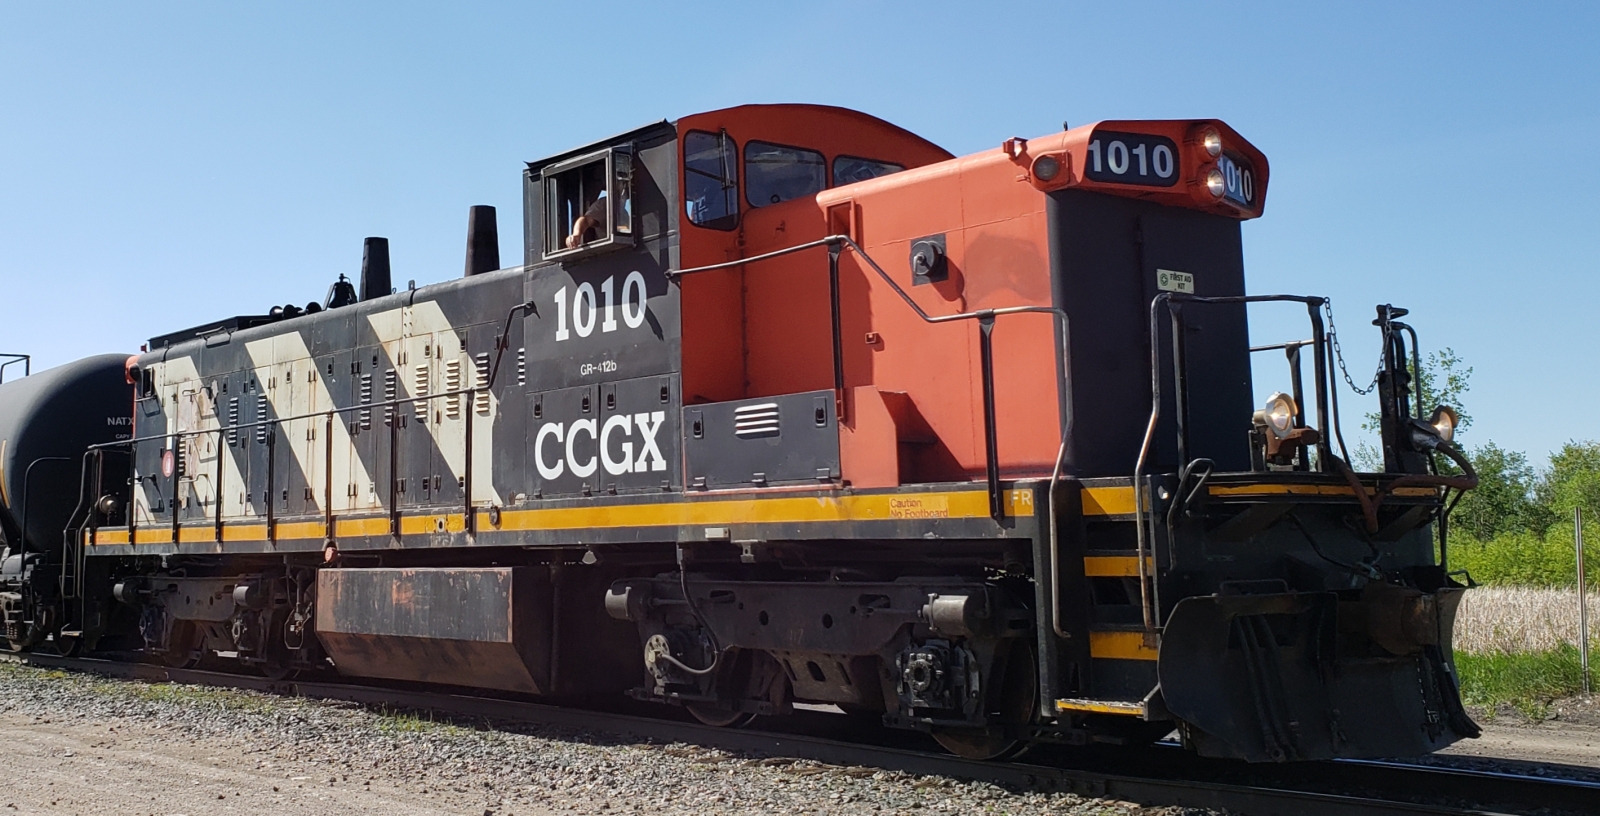 Cando Rail Services GMD1 in June 2019 at the North Transcona freight yard in Winnipeg